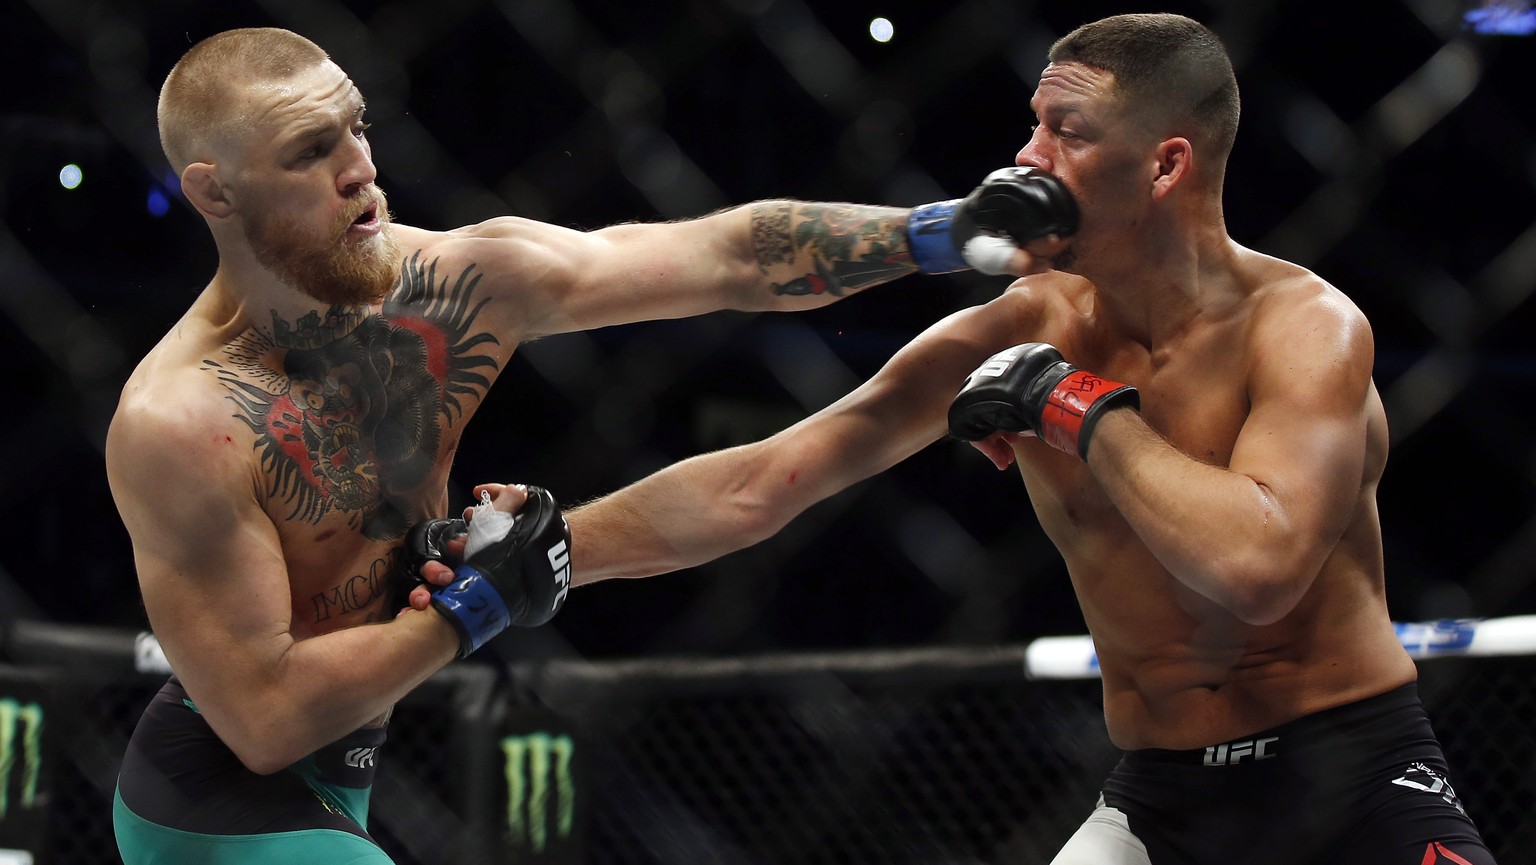 Conor McGregor, left, punches Nate Diaz during their welterweight mixed martial arts bout at UFC 202 on Saturday, Aug. 20, 2016, in Las Vegas. McGregor won by split decision. (AP Photo/Isaac Brekken)